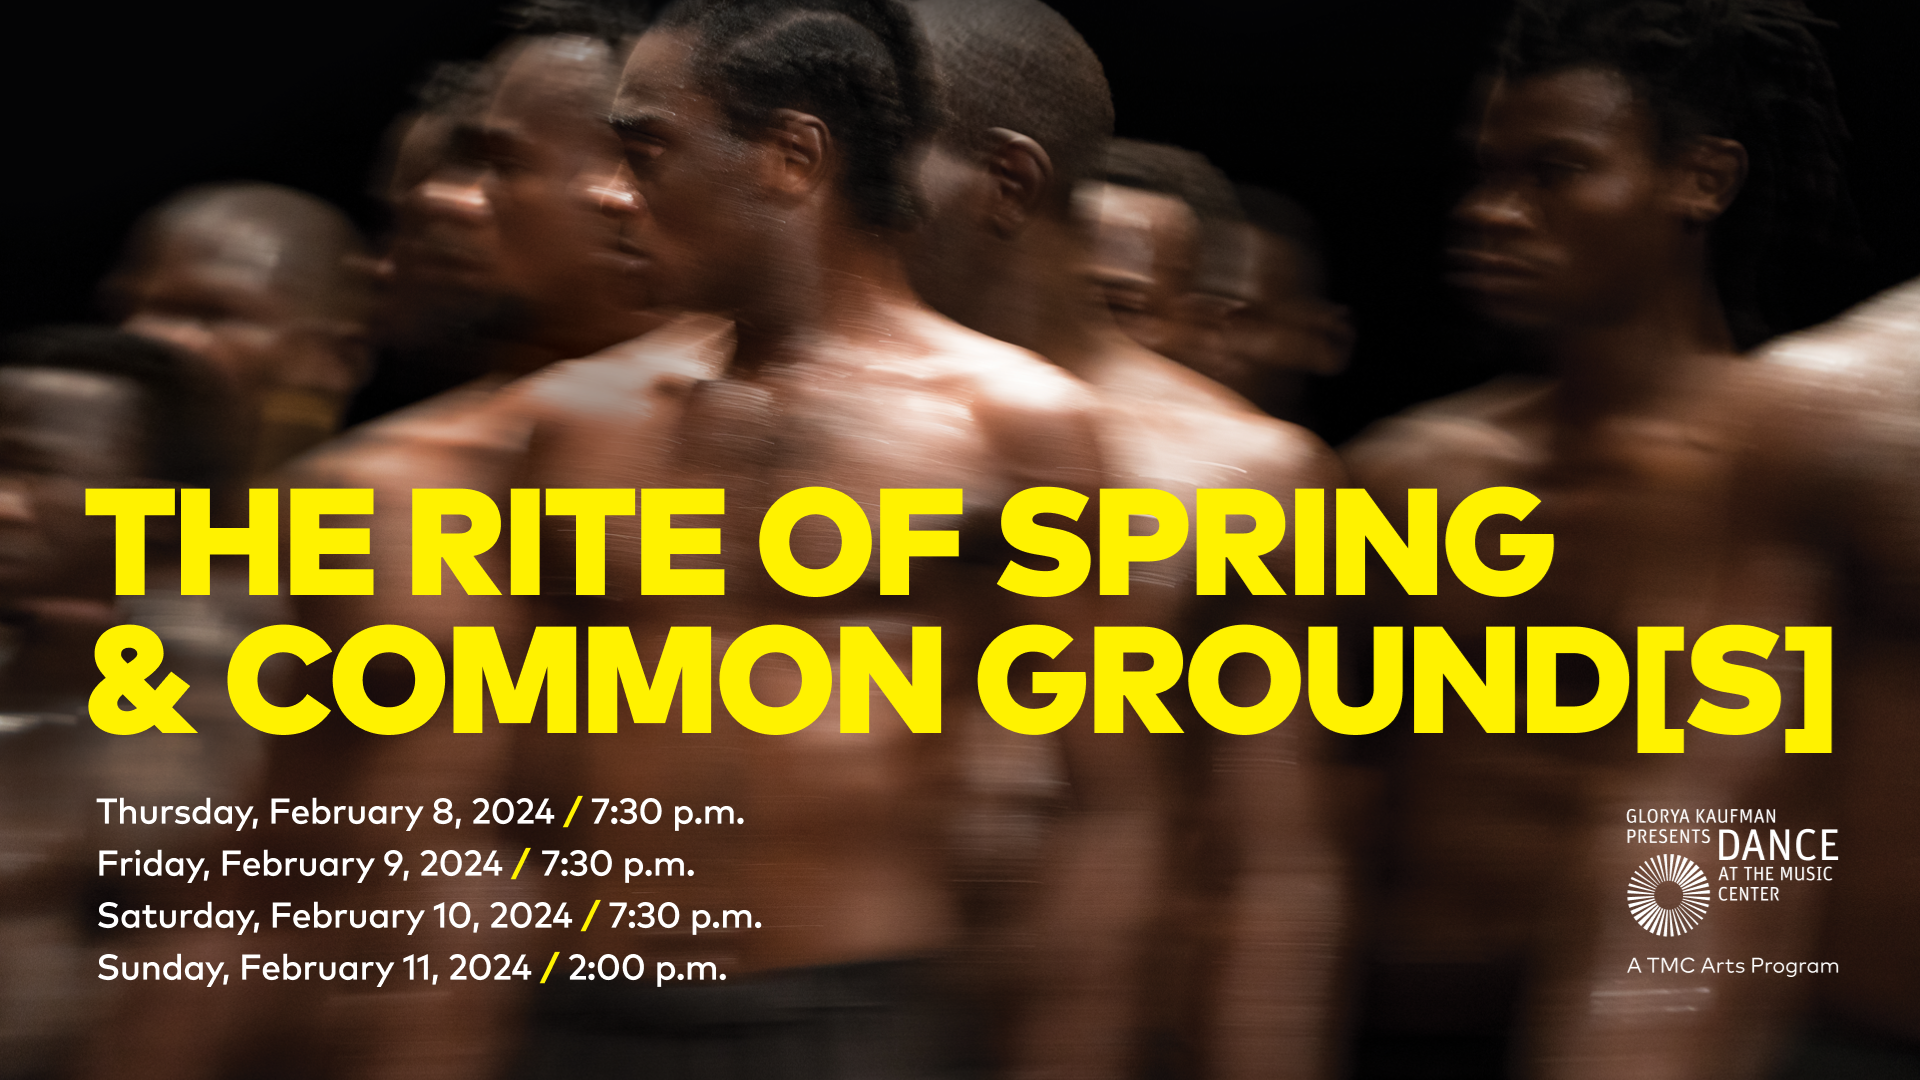 The Rite of Spring & common ground[s]